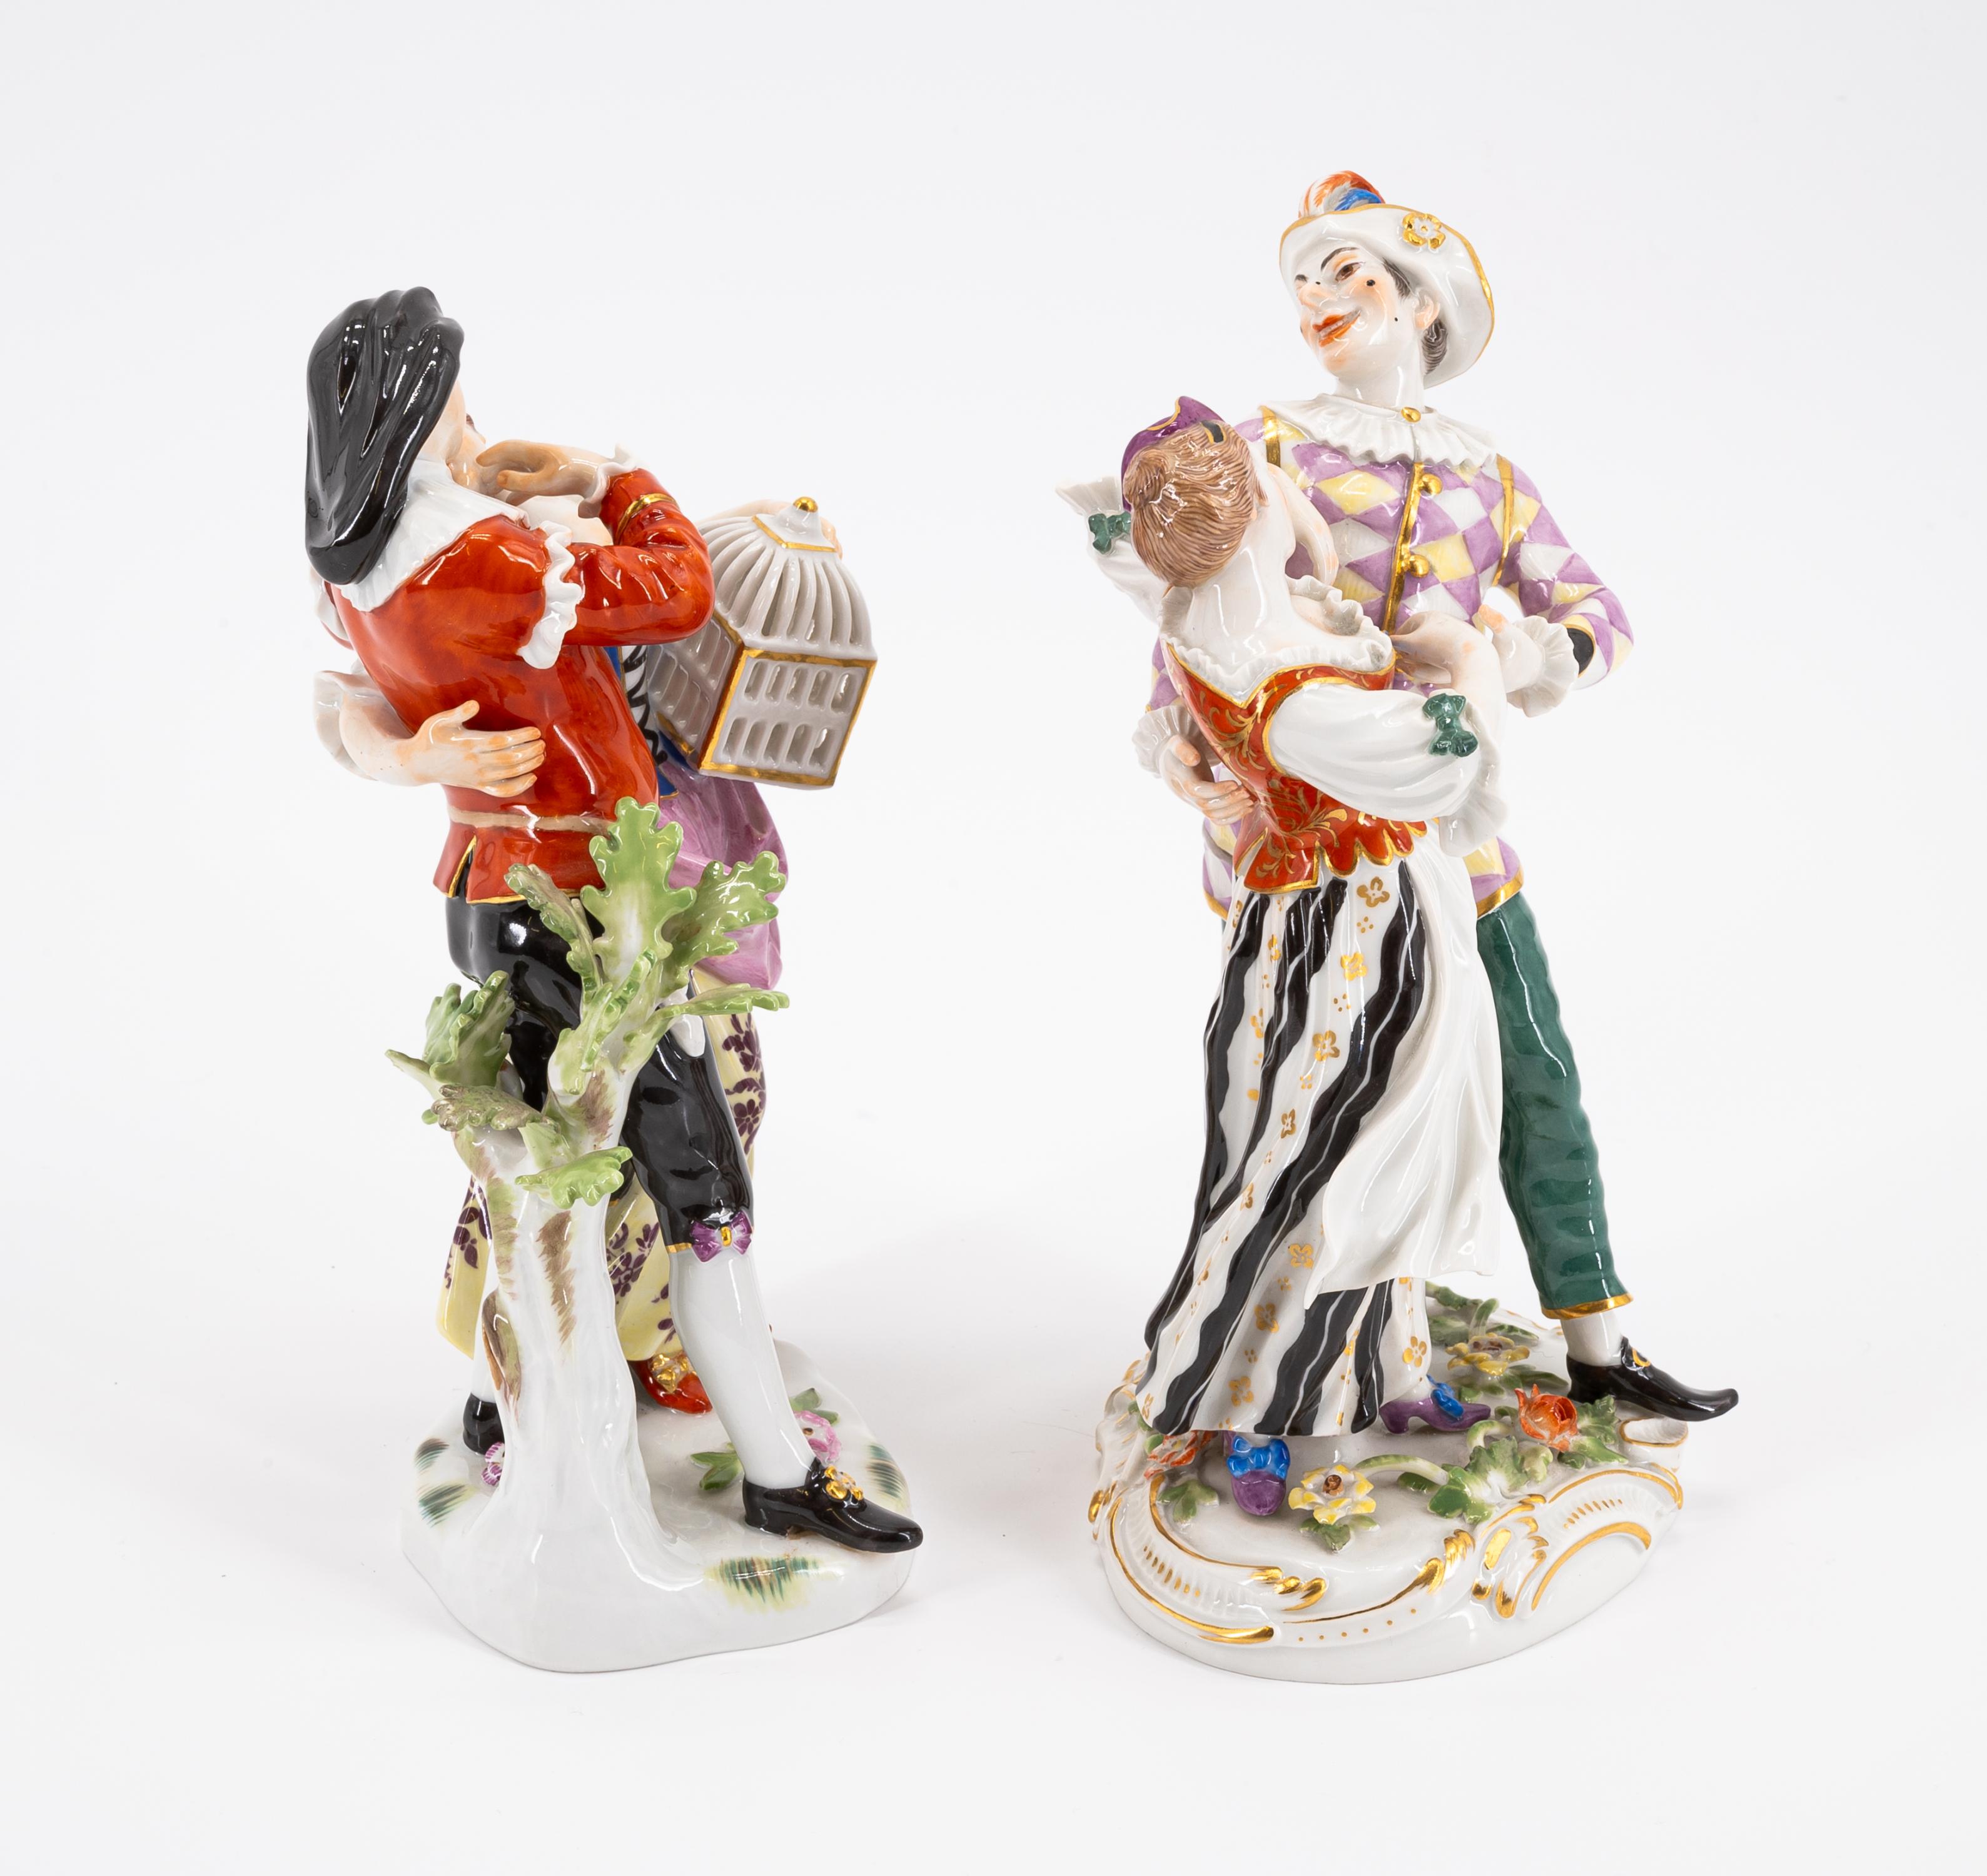 FOUR LARGE PORCELAIN COUPLES FROM THE COMMEDIA DELL'ARTE - Image 4 of 9